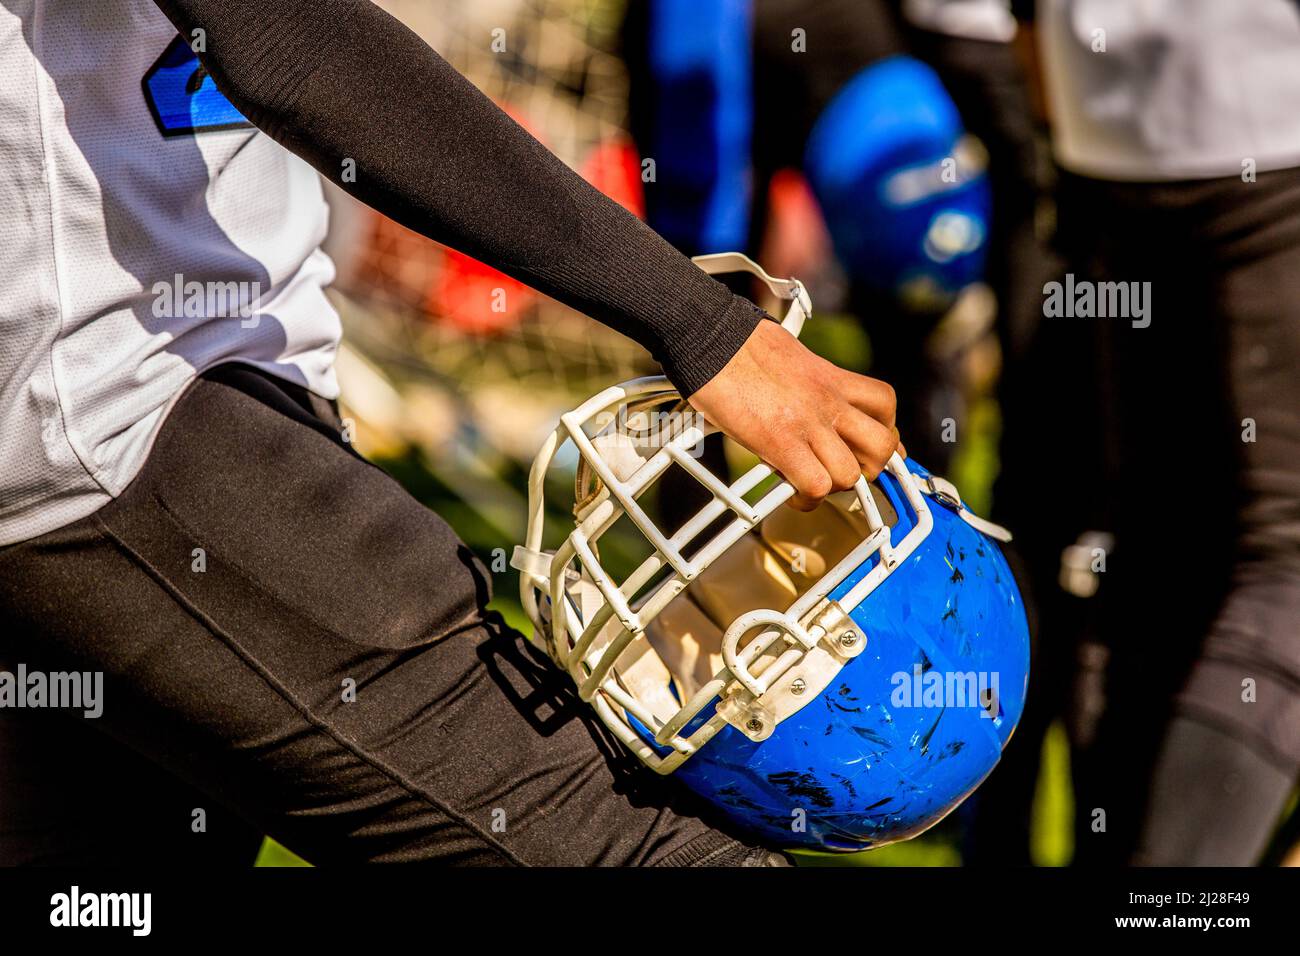 American football player holding protective helmet while waiting Stock Photo